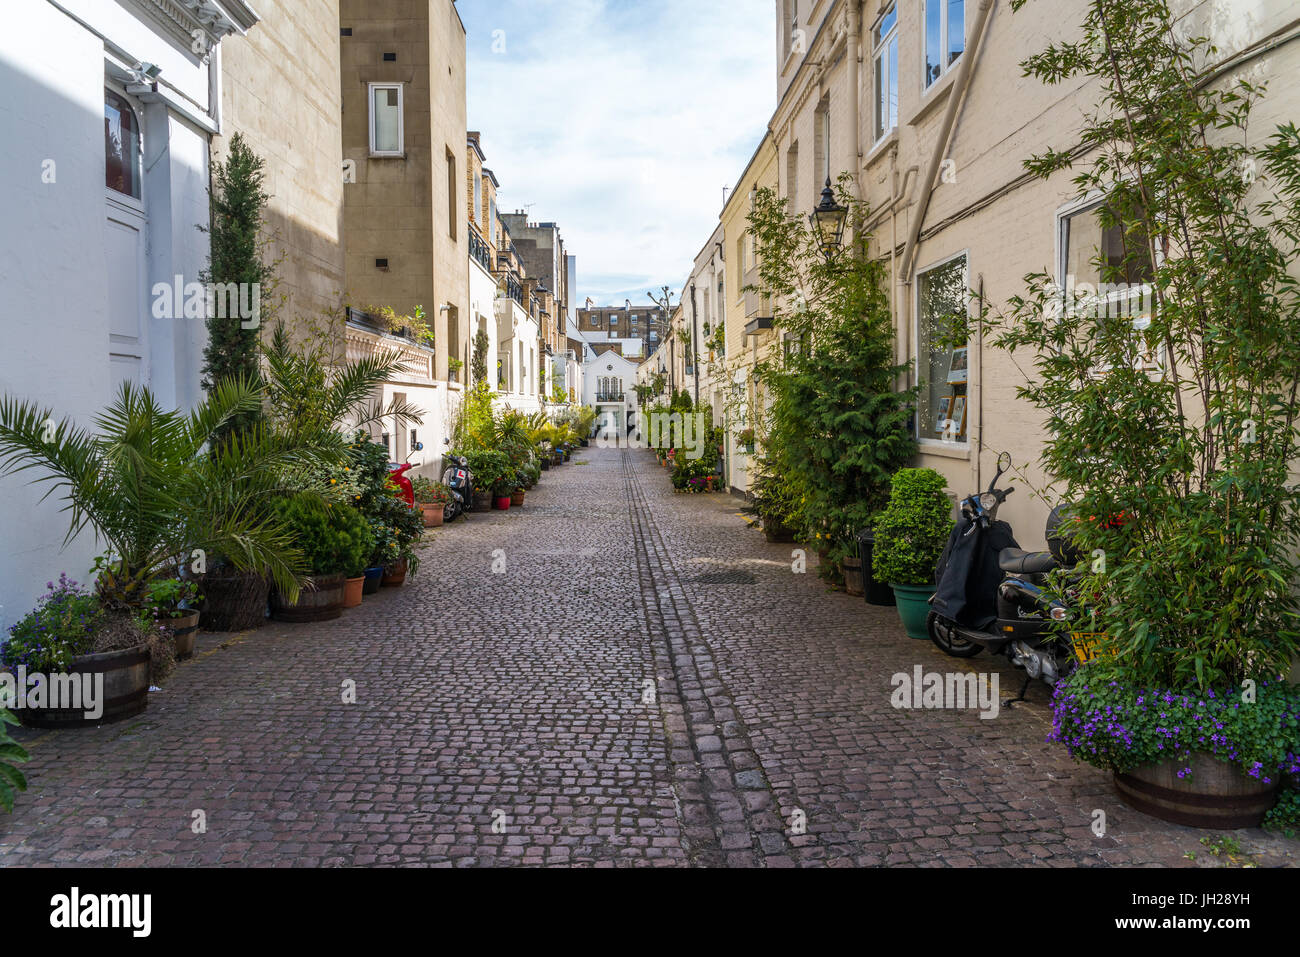 A mews in London, where stables were traditionally located, London, England, United Kingdom, Europe Stock Photo